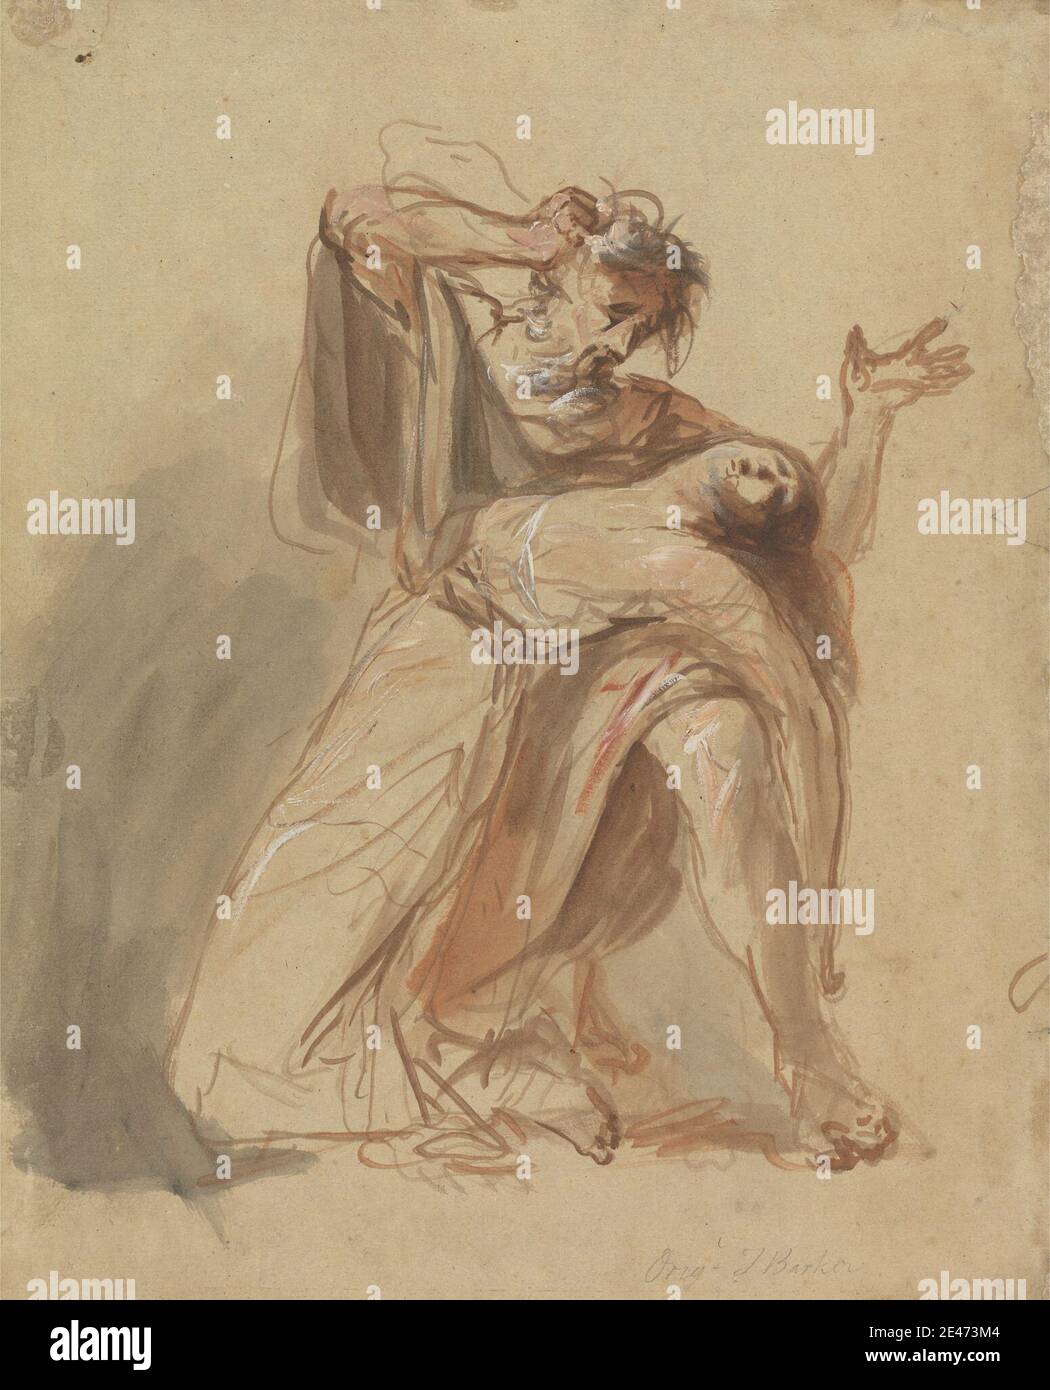 unknown artist, The Death of Cordelia, undated. Watercolor, gouache, red crayon, and graphite on moderately thick, slightly textured, beige laid paper.   beard , carrying , cloak , daughter , death , dress , father , figure study , gesturing , grief , holding , king (person) , King Lear, Act V, Scene III , King Lear, play by William Shakespeare , literary theme , man , murder , play , plays by William Shakespeare , princess , sadness , sash , woman. King Lear (character in King Lear) Shakespeare, William (1564–1616), playwright and poet Cordelia (character in King Lear) Stock Photo